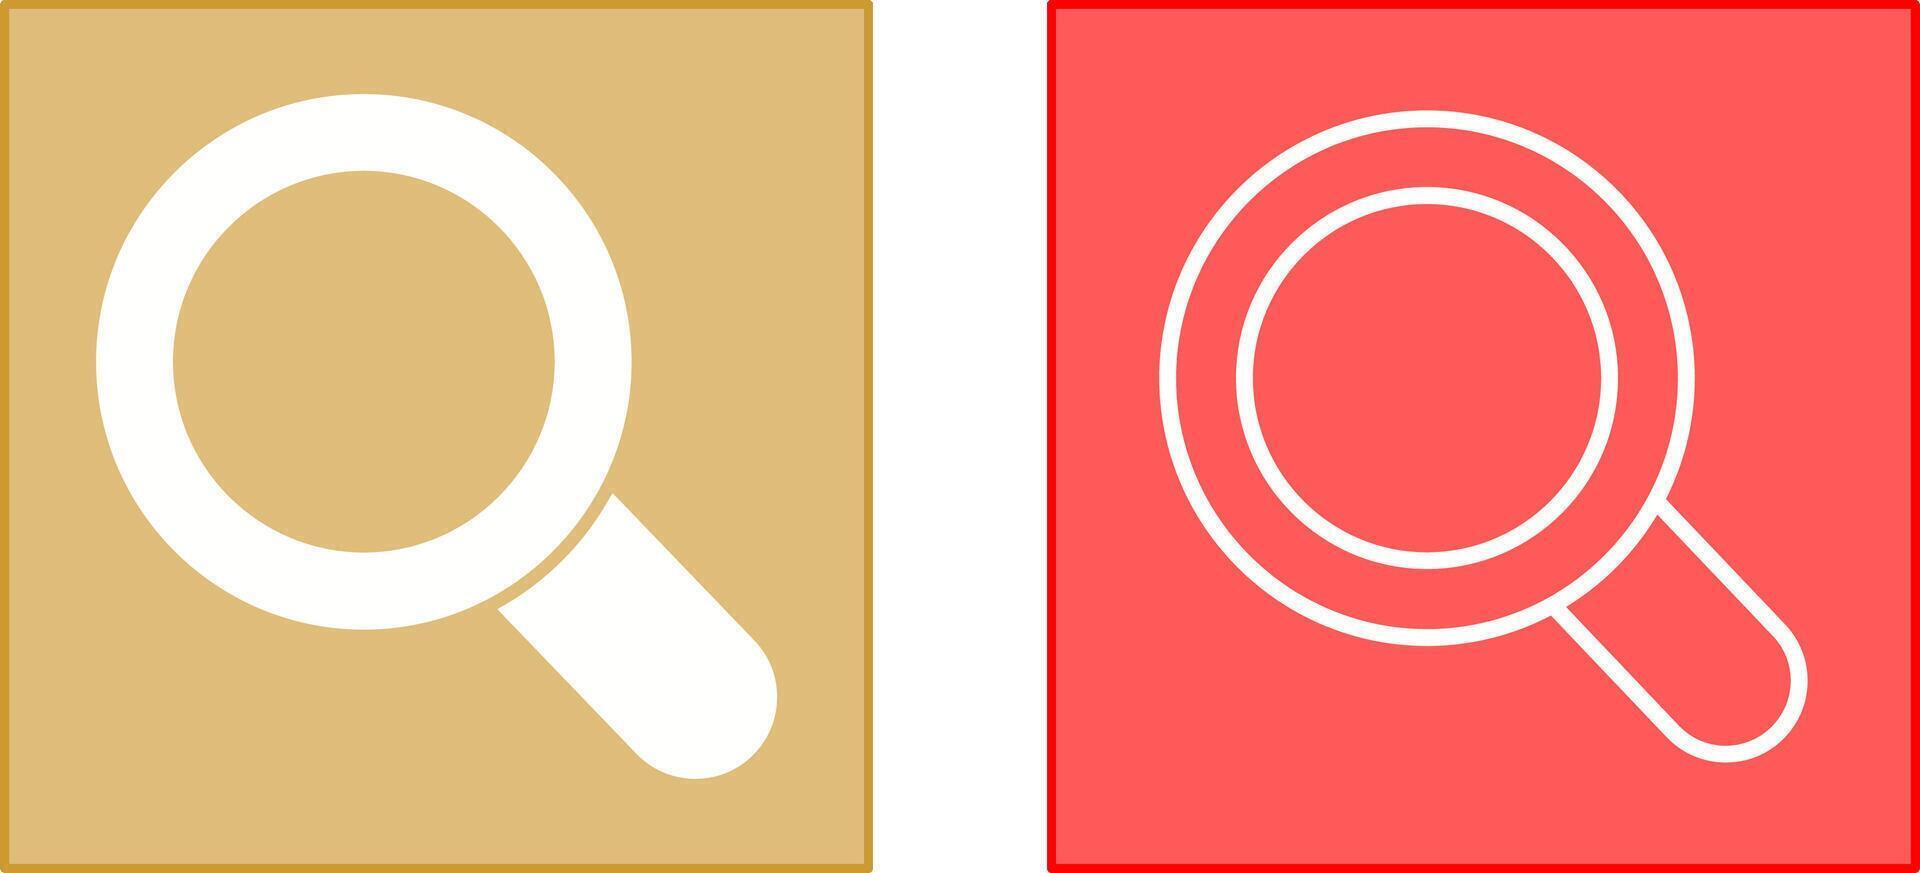 Searching Icon Design vector